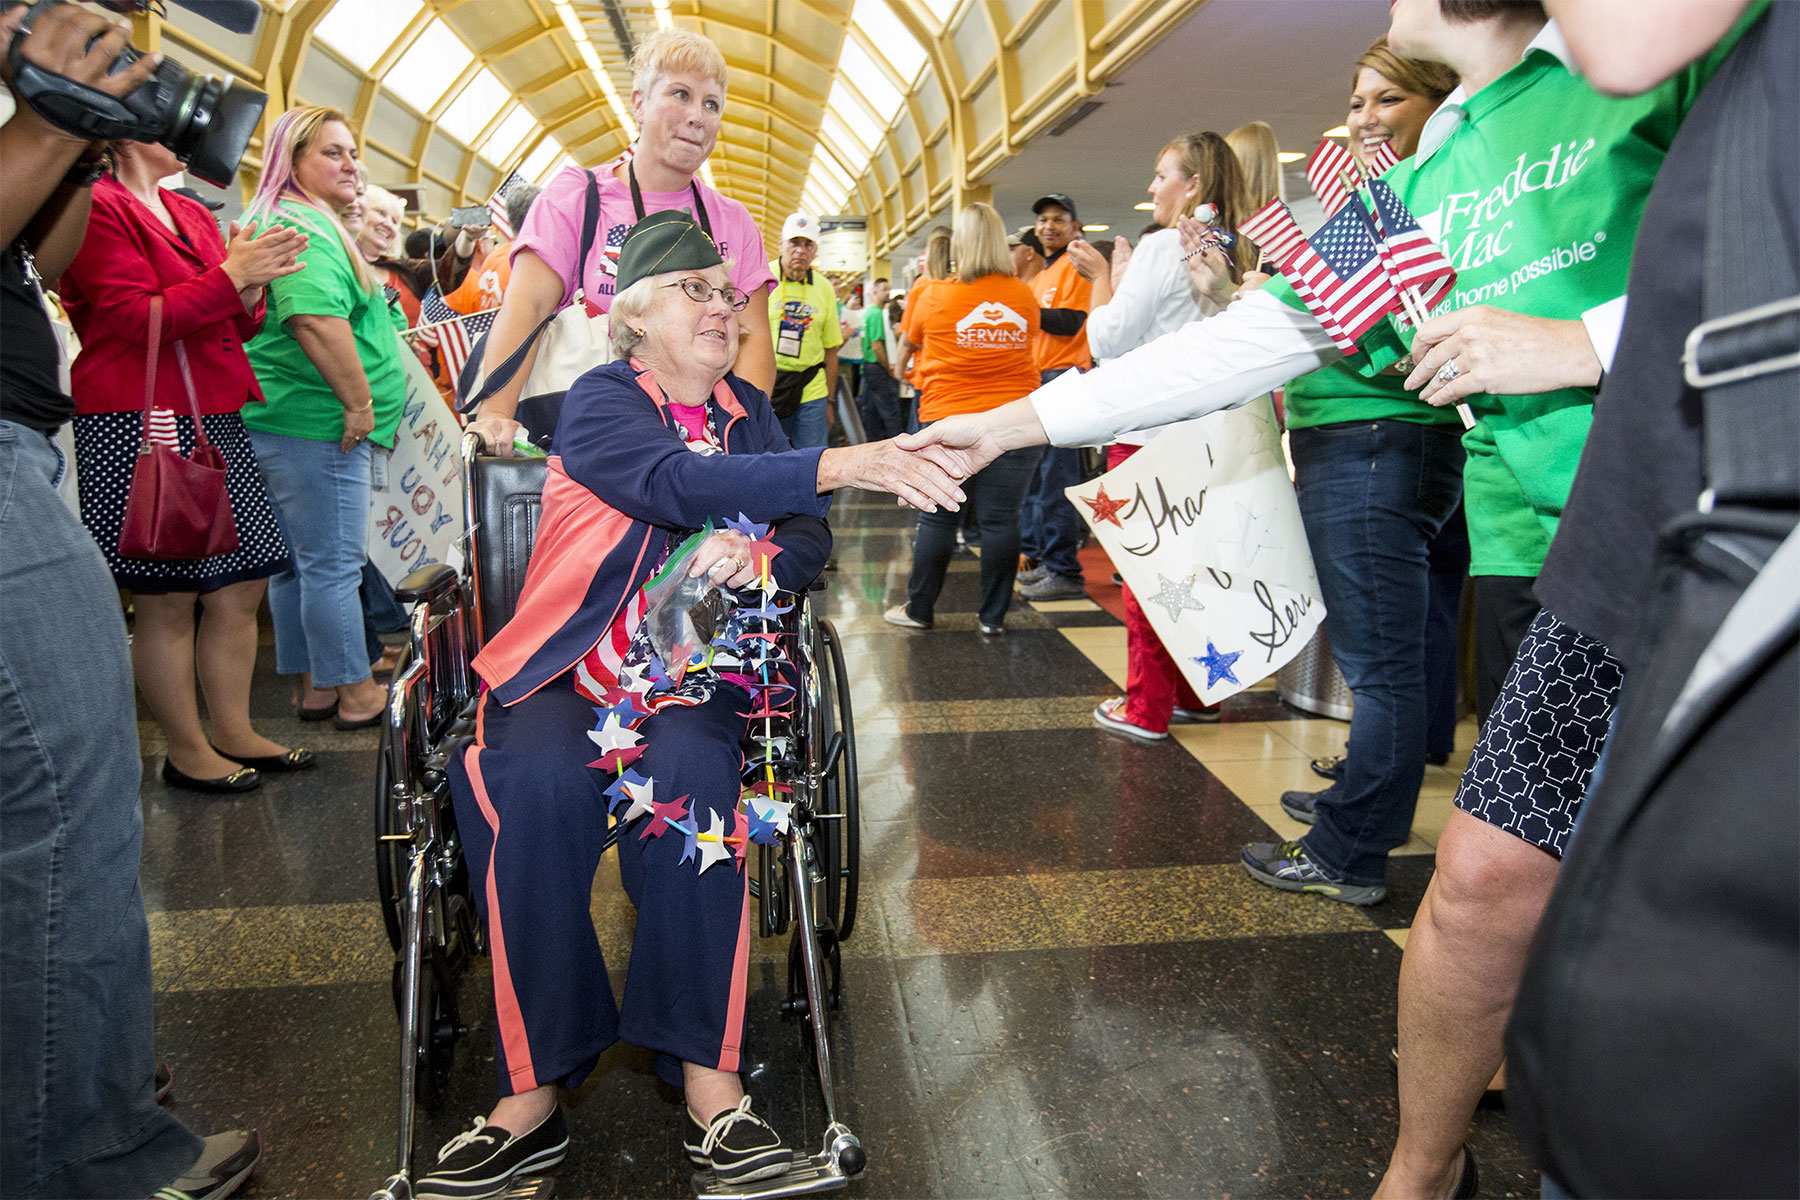 A veteran shakes the hand of one of over 400 supporters who greeted the first all-female honor flight in the United States Sept. 22, 2015 at Ronald Reagan International Airport in Arlington. Over 75 female veterans from World War II, the Korean War and the Vietnam War were in attendance, as well as 75 escorts, who were also female veterans or active-duty military. (U.S. Army/Nell King)